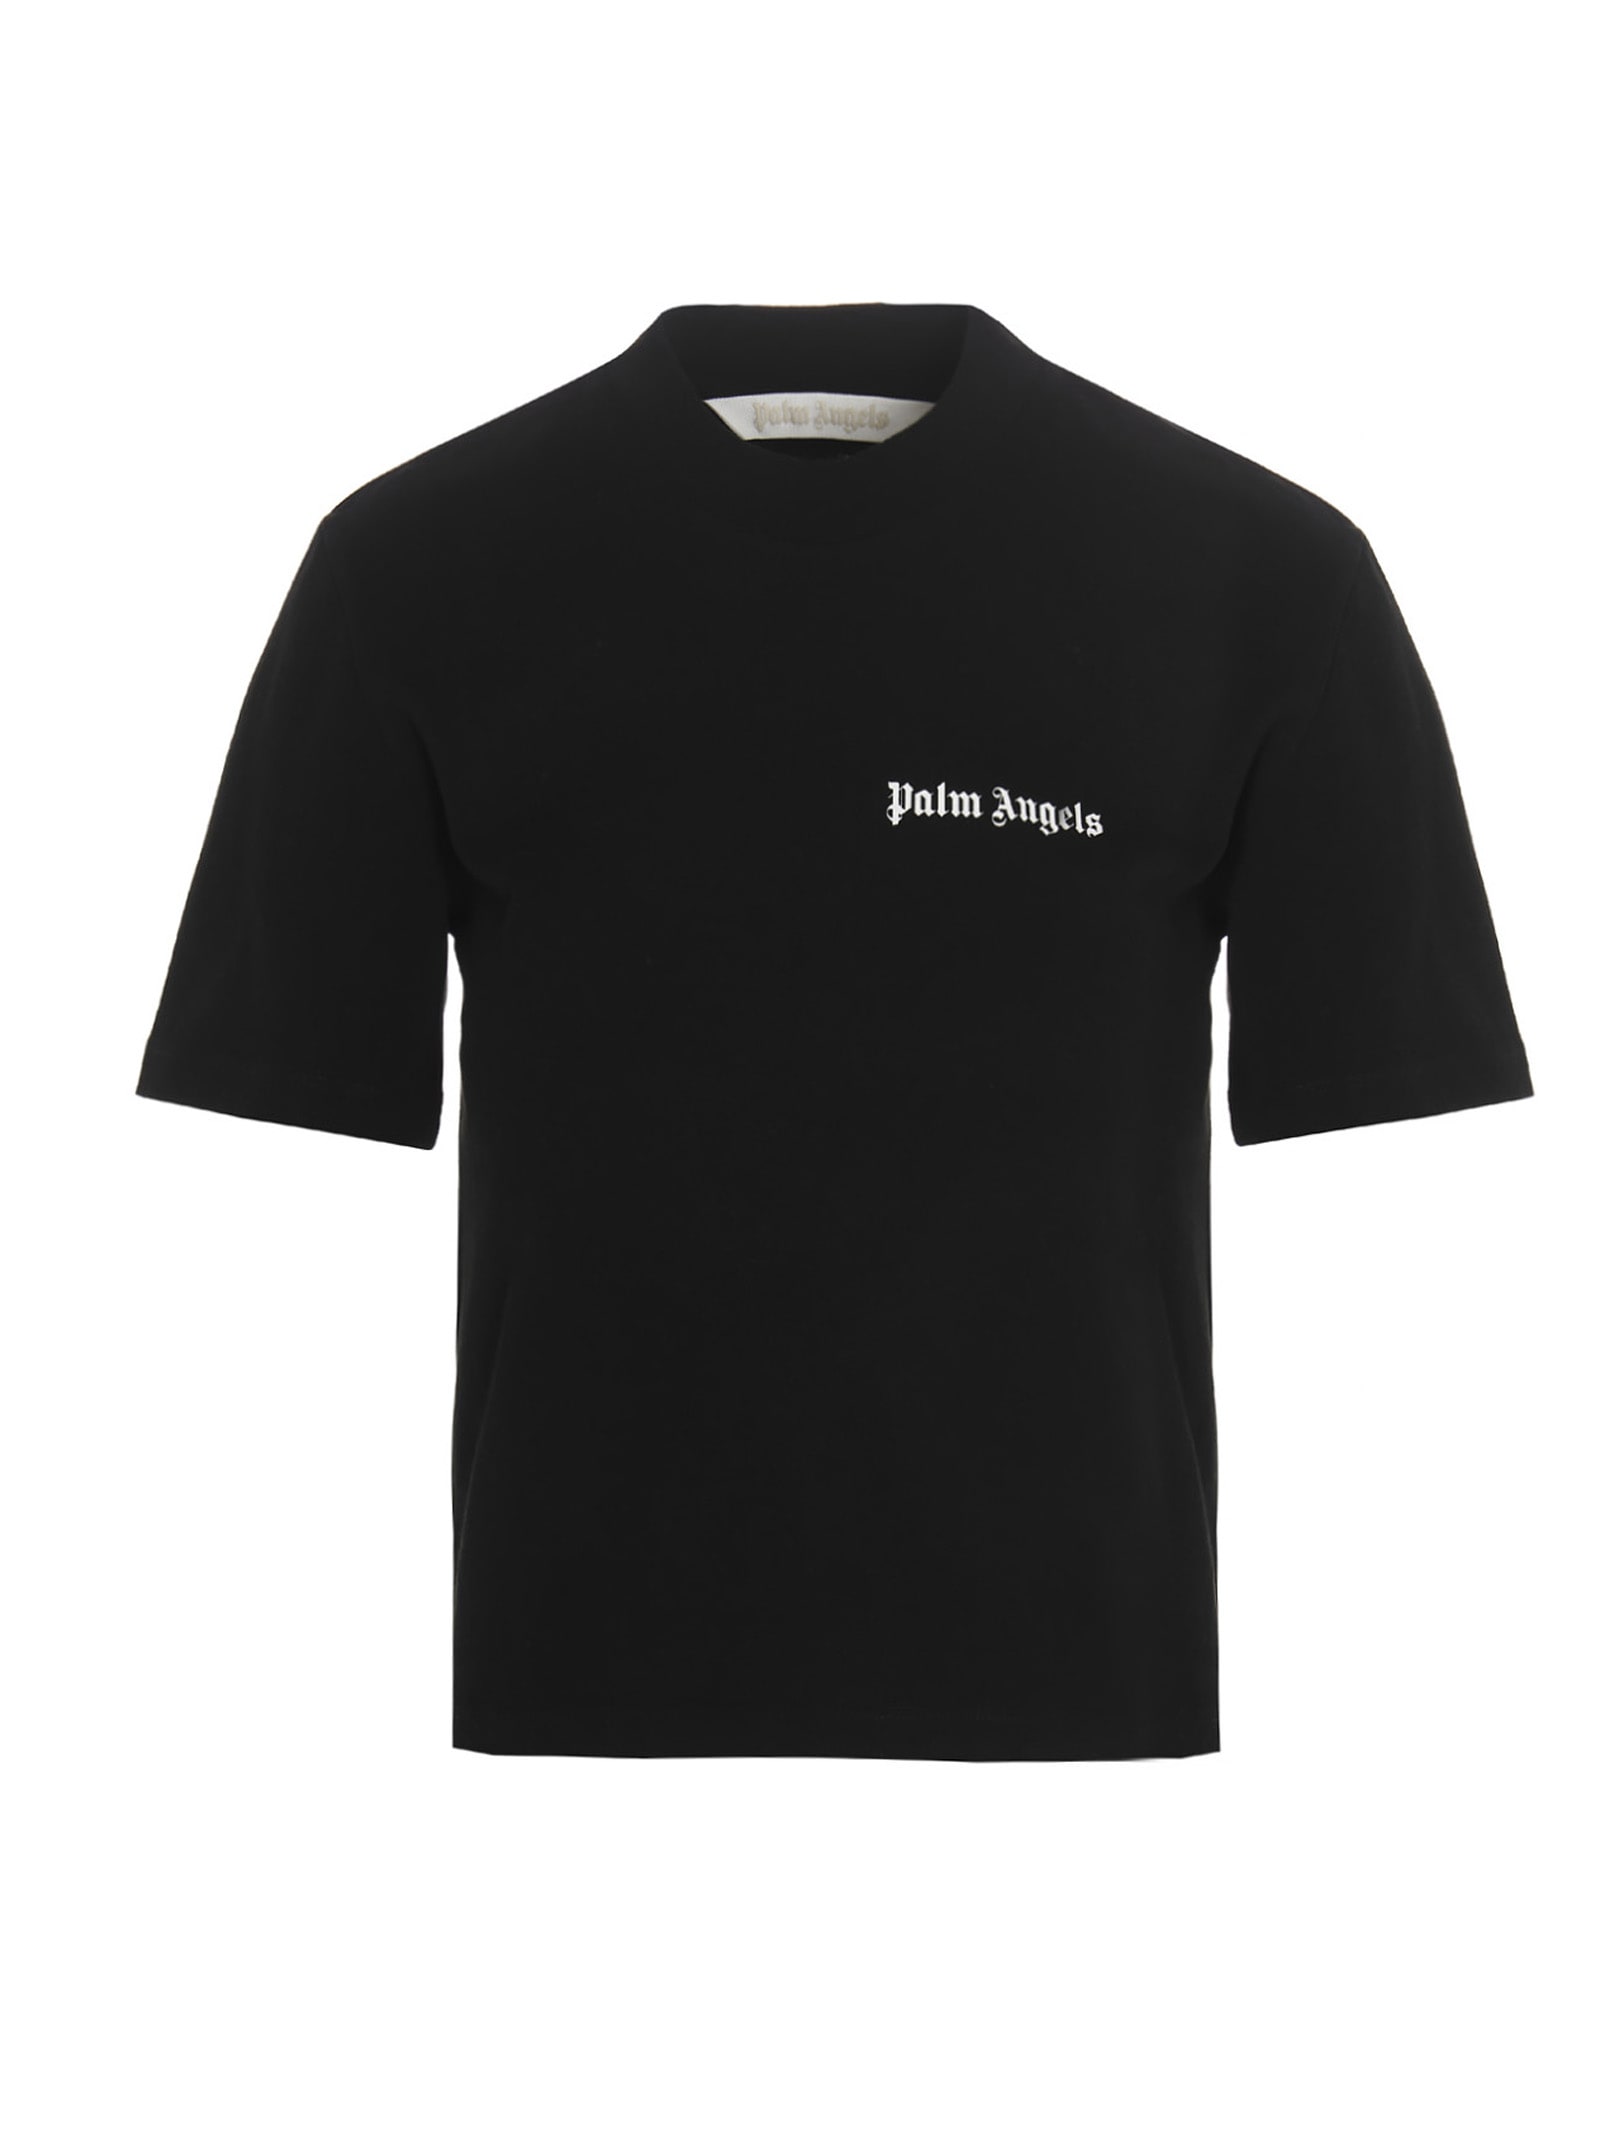 Palm Angels T-shirt classic Logo Fitted Tee T-shirt